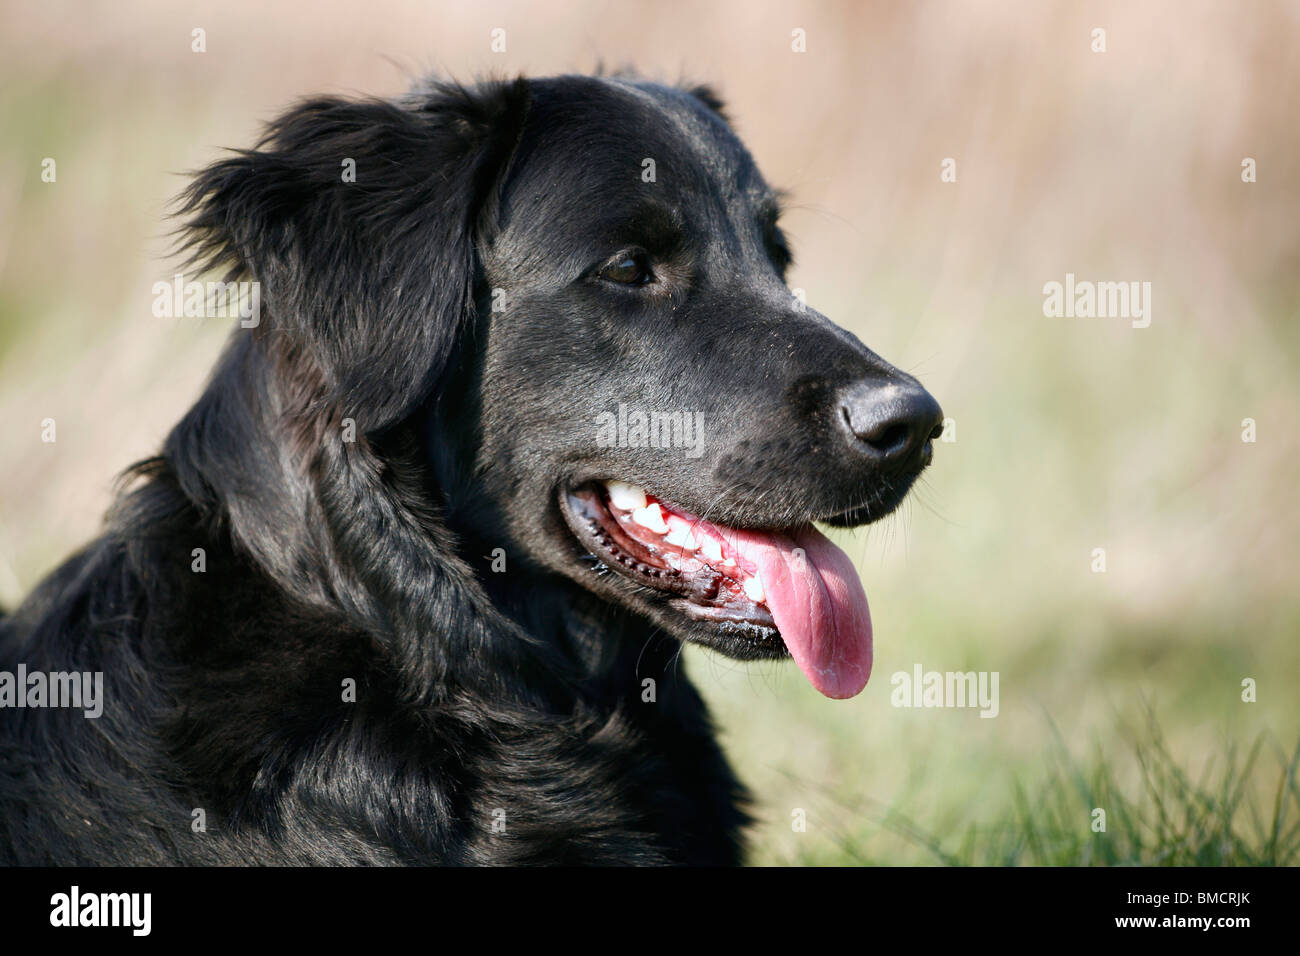 Schwarzer Hund High Resolution Stock Photography and Images - Alamy